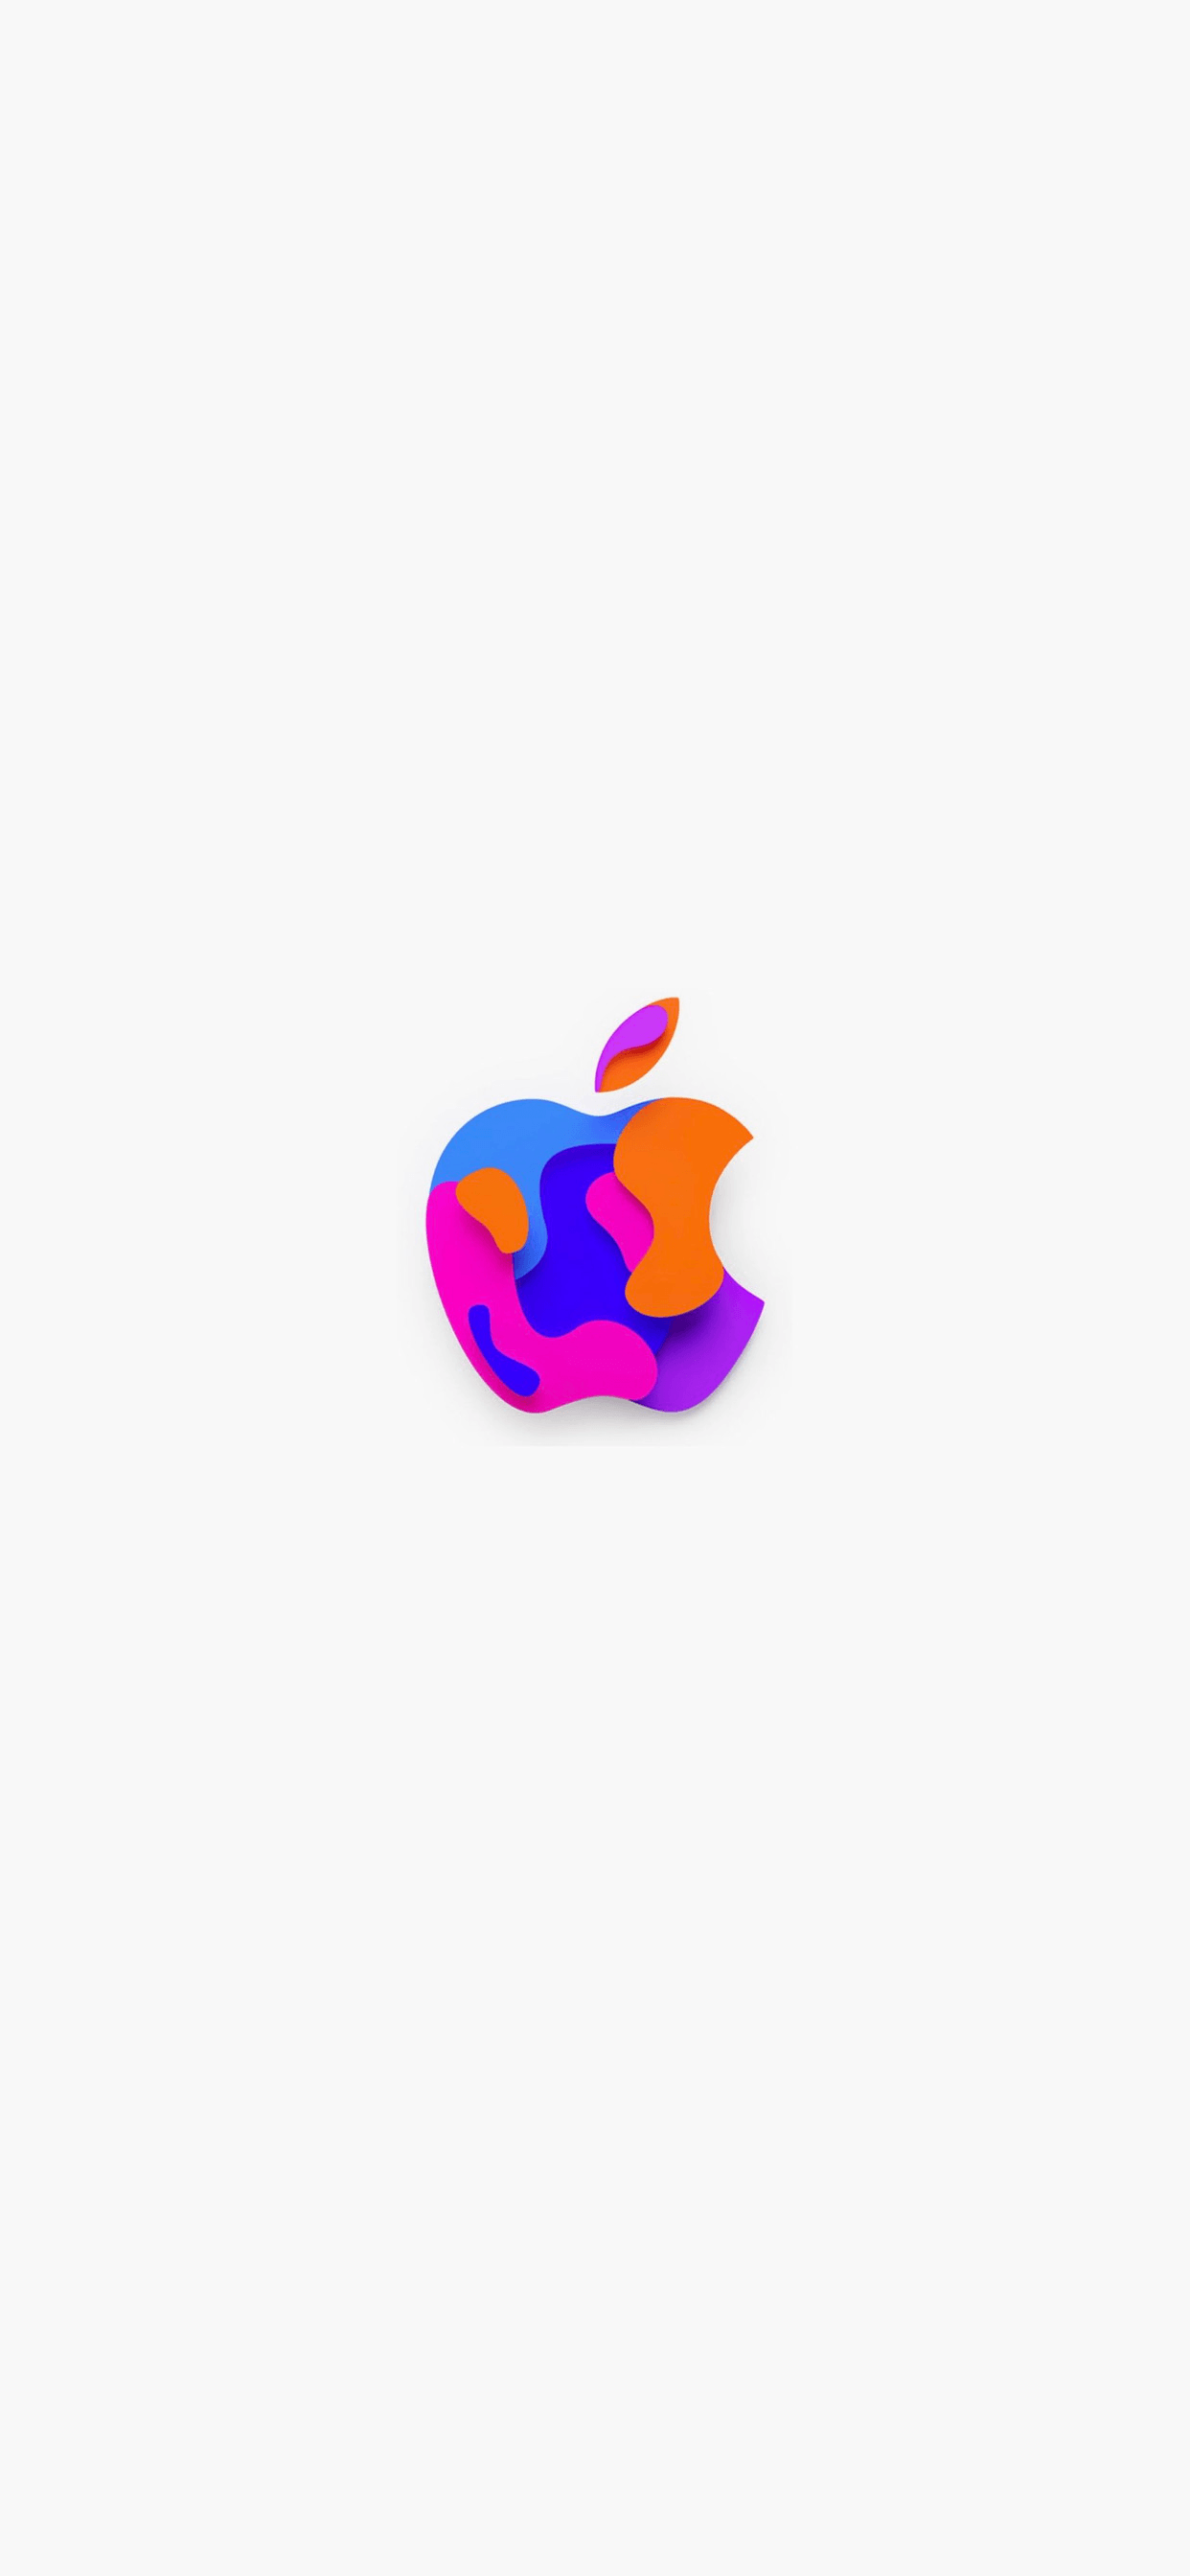 iPhone Apple Logo - There's more in the making: 33 Apple logo wallpapers